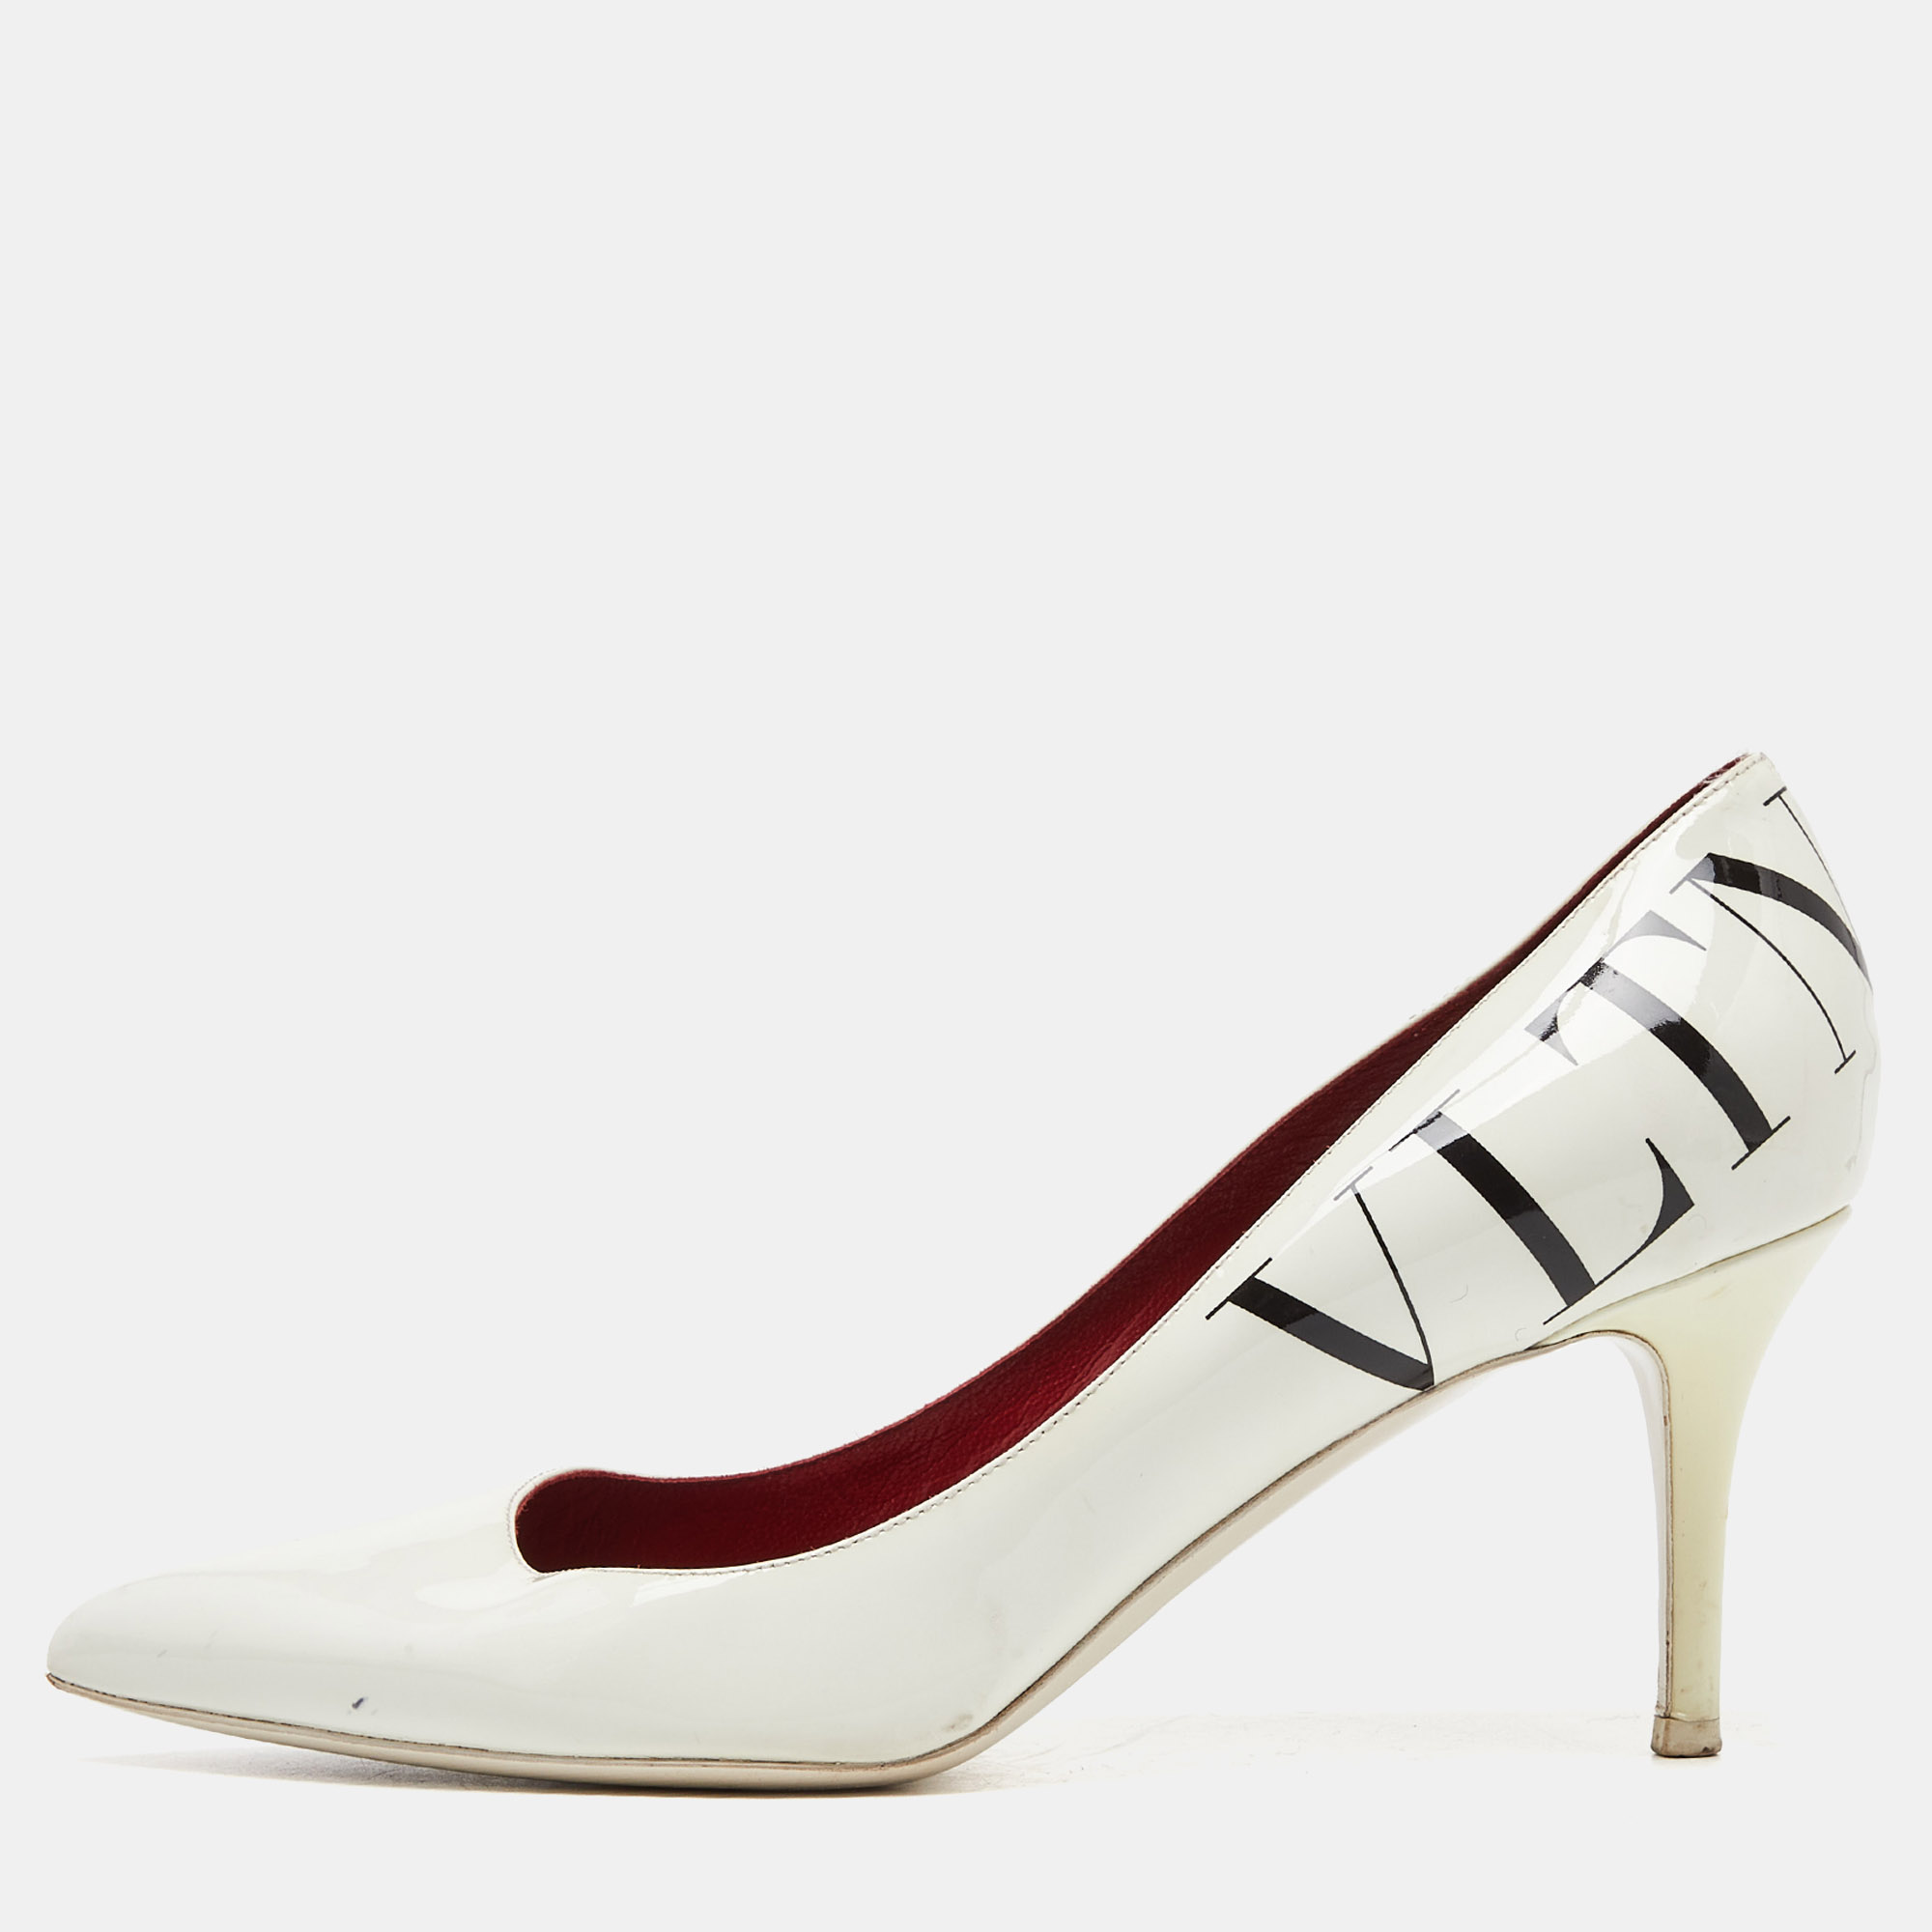 Valentino white patent leather vltn pointed toe pumps size 39